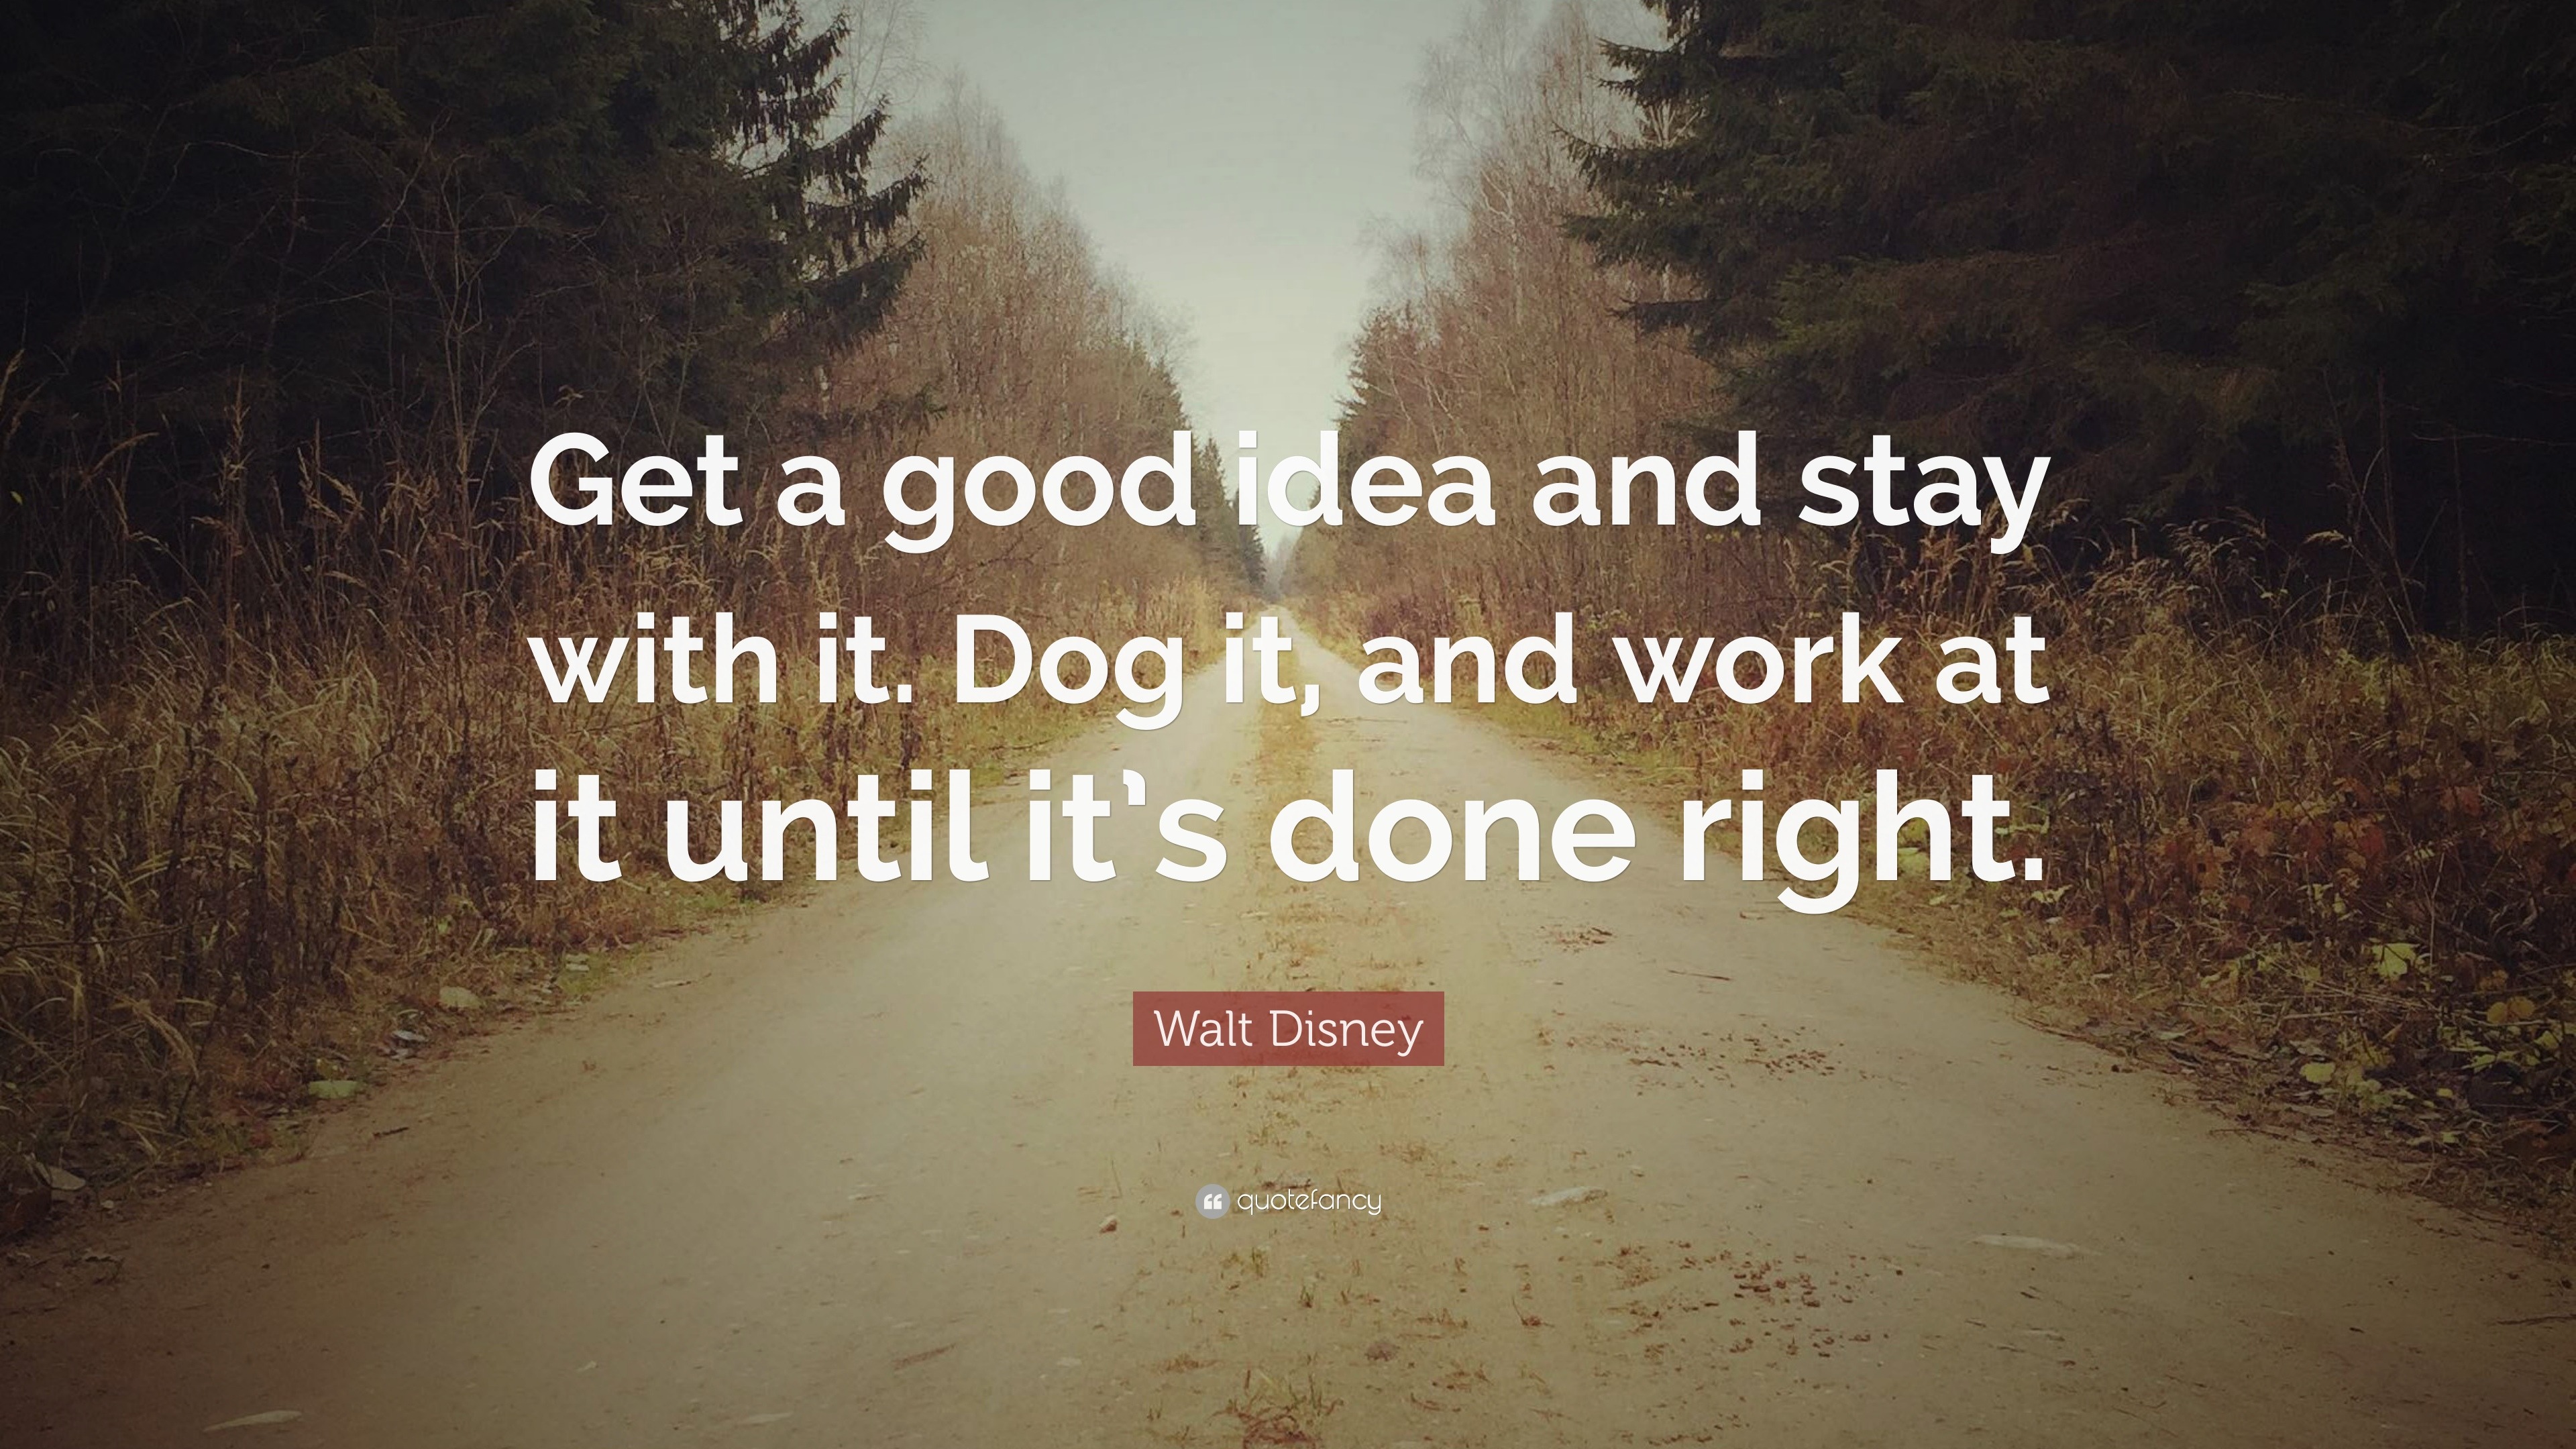 Walt Disney Quote: “Get a good idea and stay with it. Dog it, and work